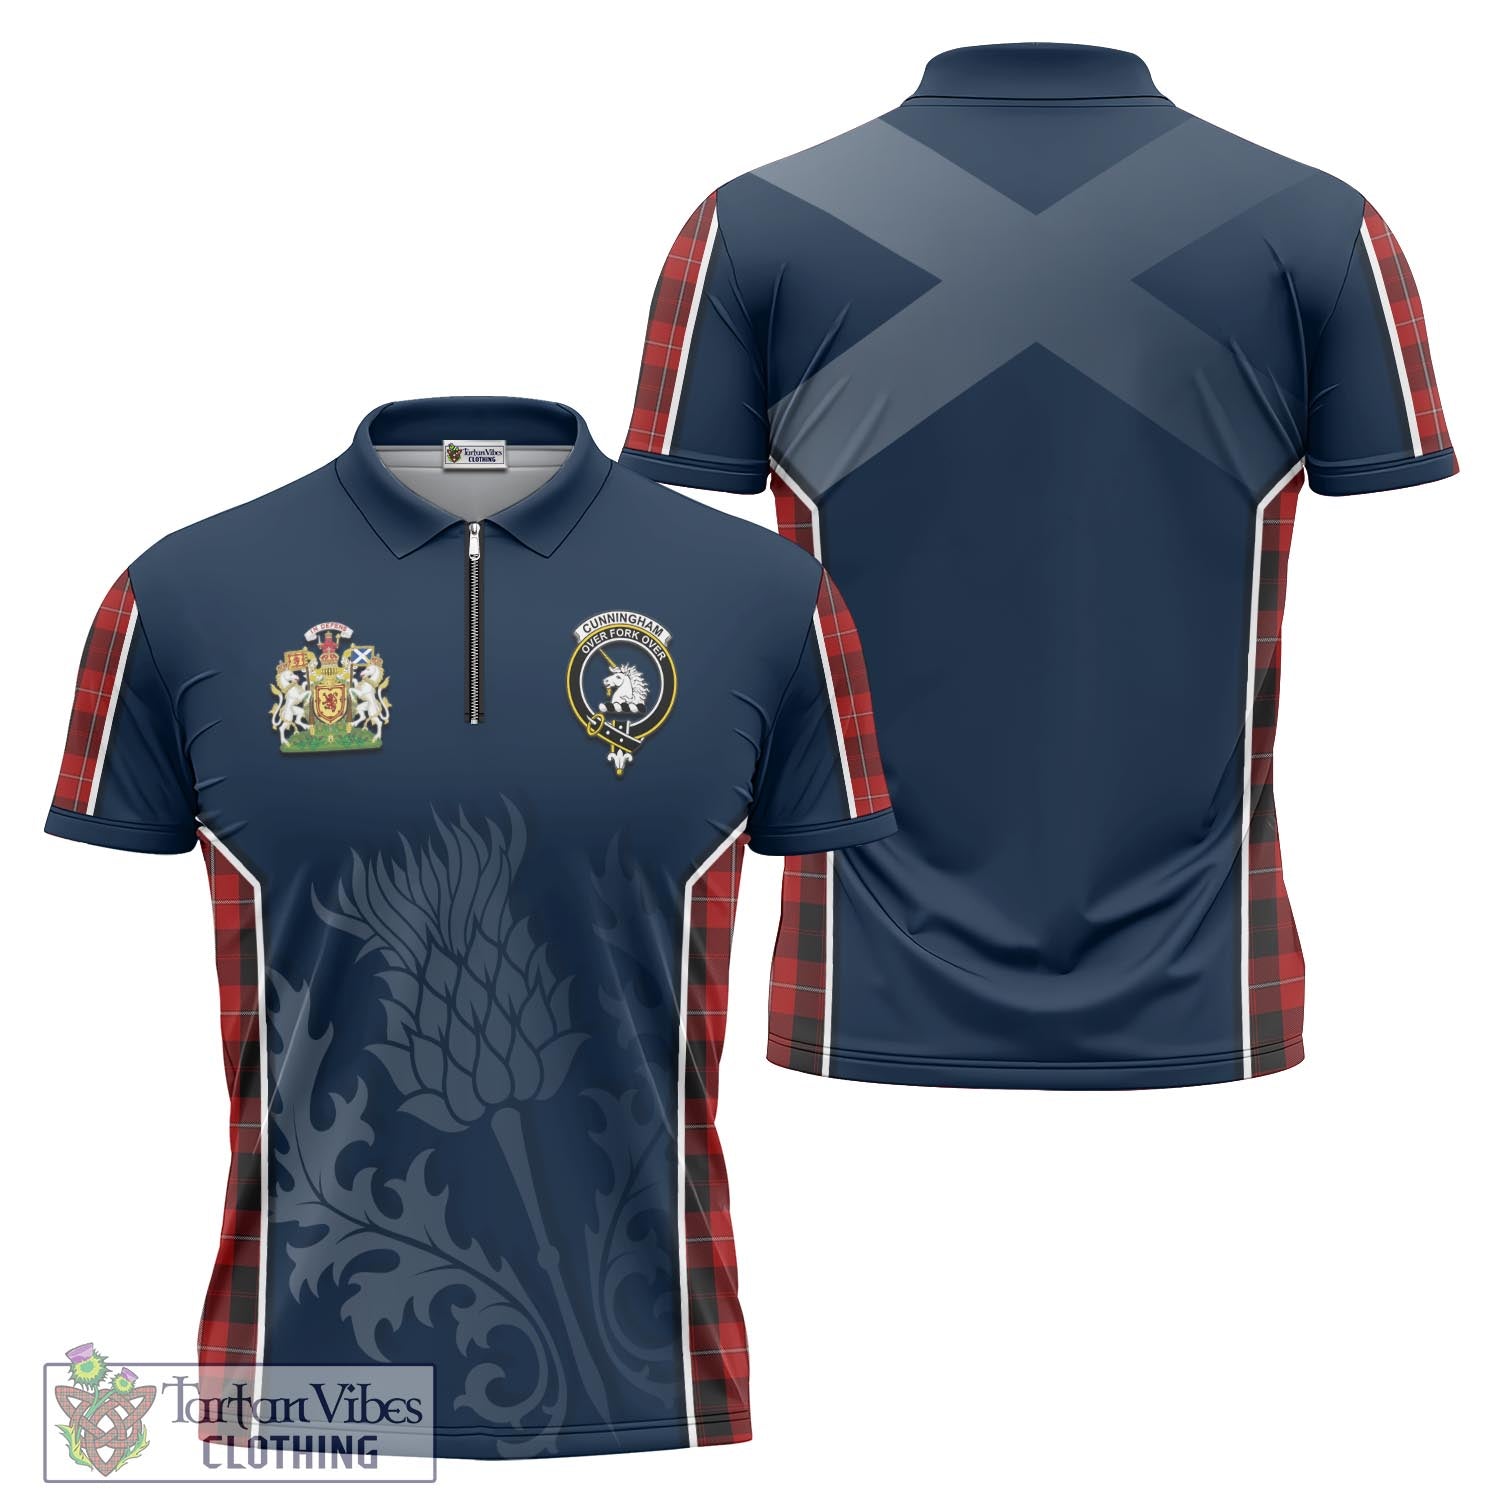 Tartan Vibes Clothing Cunningham Tartan Zipper Polo Shirt with Family Crest and Scottish Thistle Vibes Sport Style